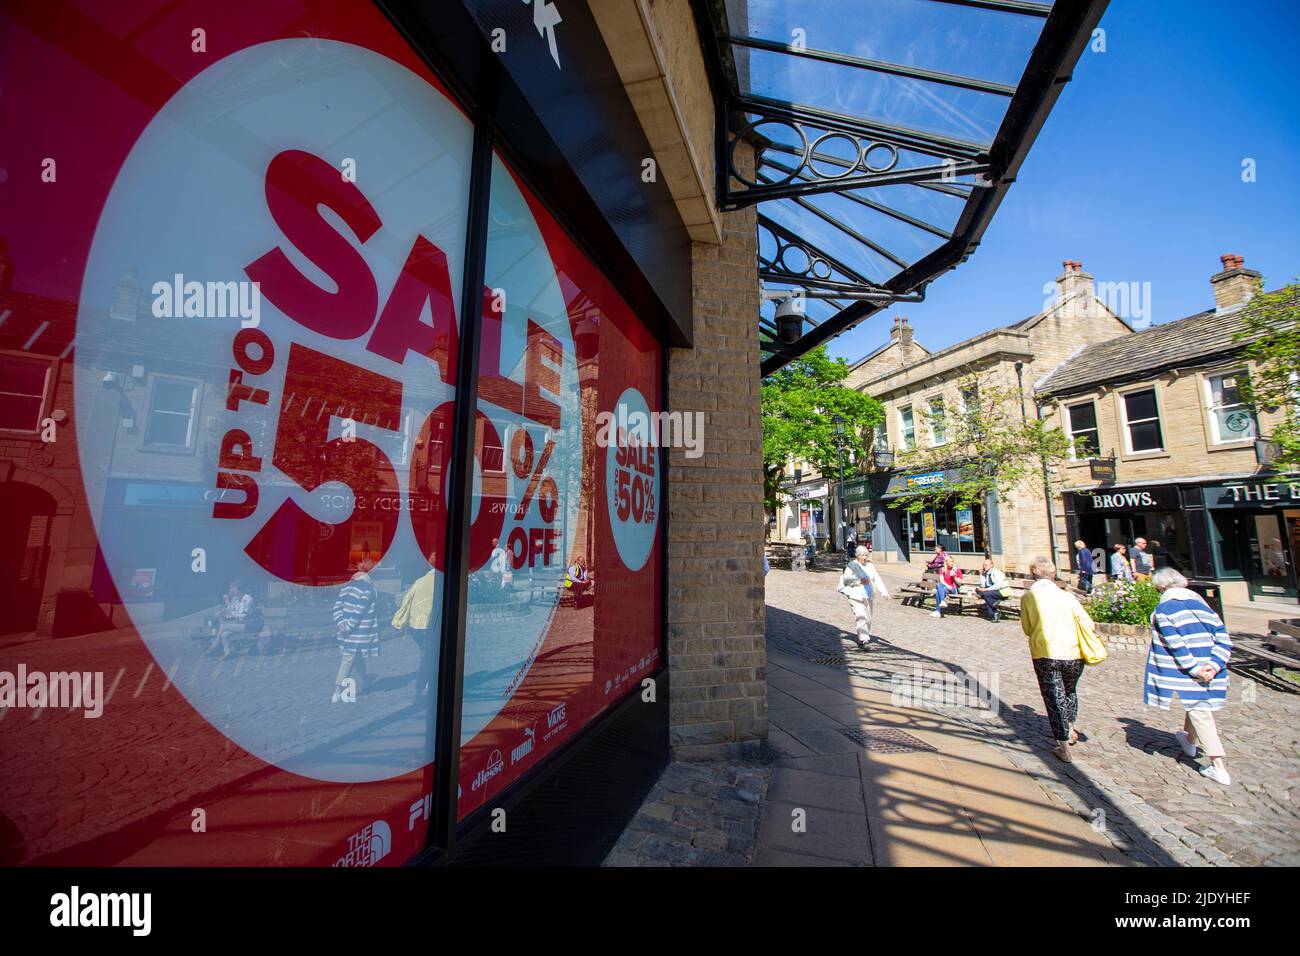 Halifax, West Yorkshire, UK. 24th June 2022  British retail sales contracted in May as consumers tightened their belts amid a cost of living crisis, fuelling concerns for a downturn in the UK economy.  The quantity of goods bought in Great Britain fell 0.5 per cent between April and May, reversing the expansion in the previous month, according to data published on Friday by the Office for National Statistics.   Credit: Windmill Images/Alamy Live News Stock Photo